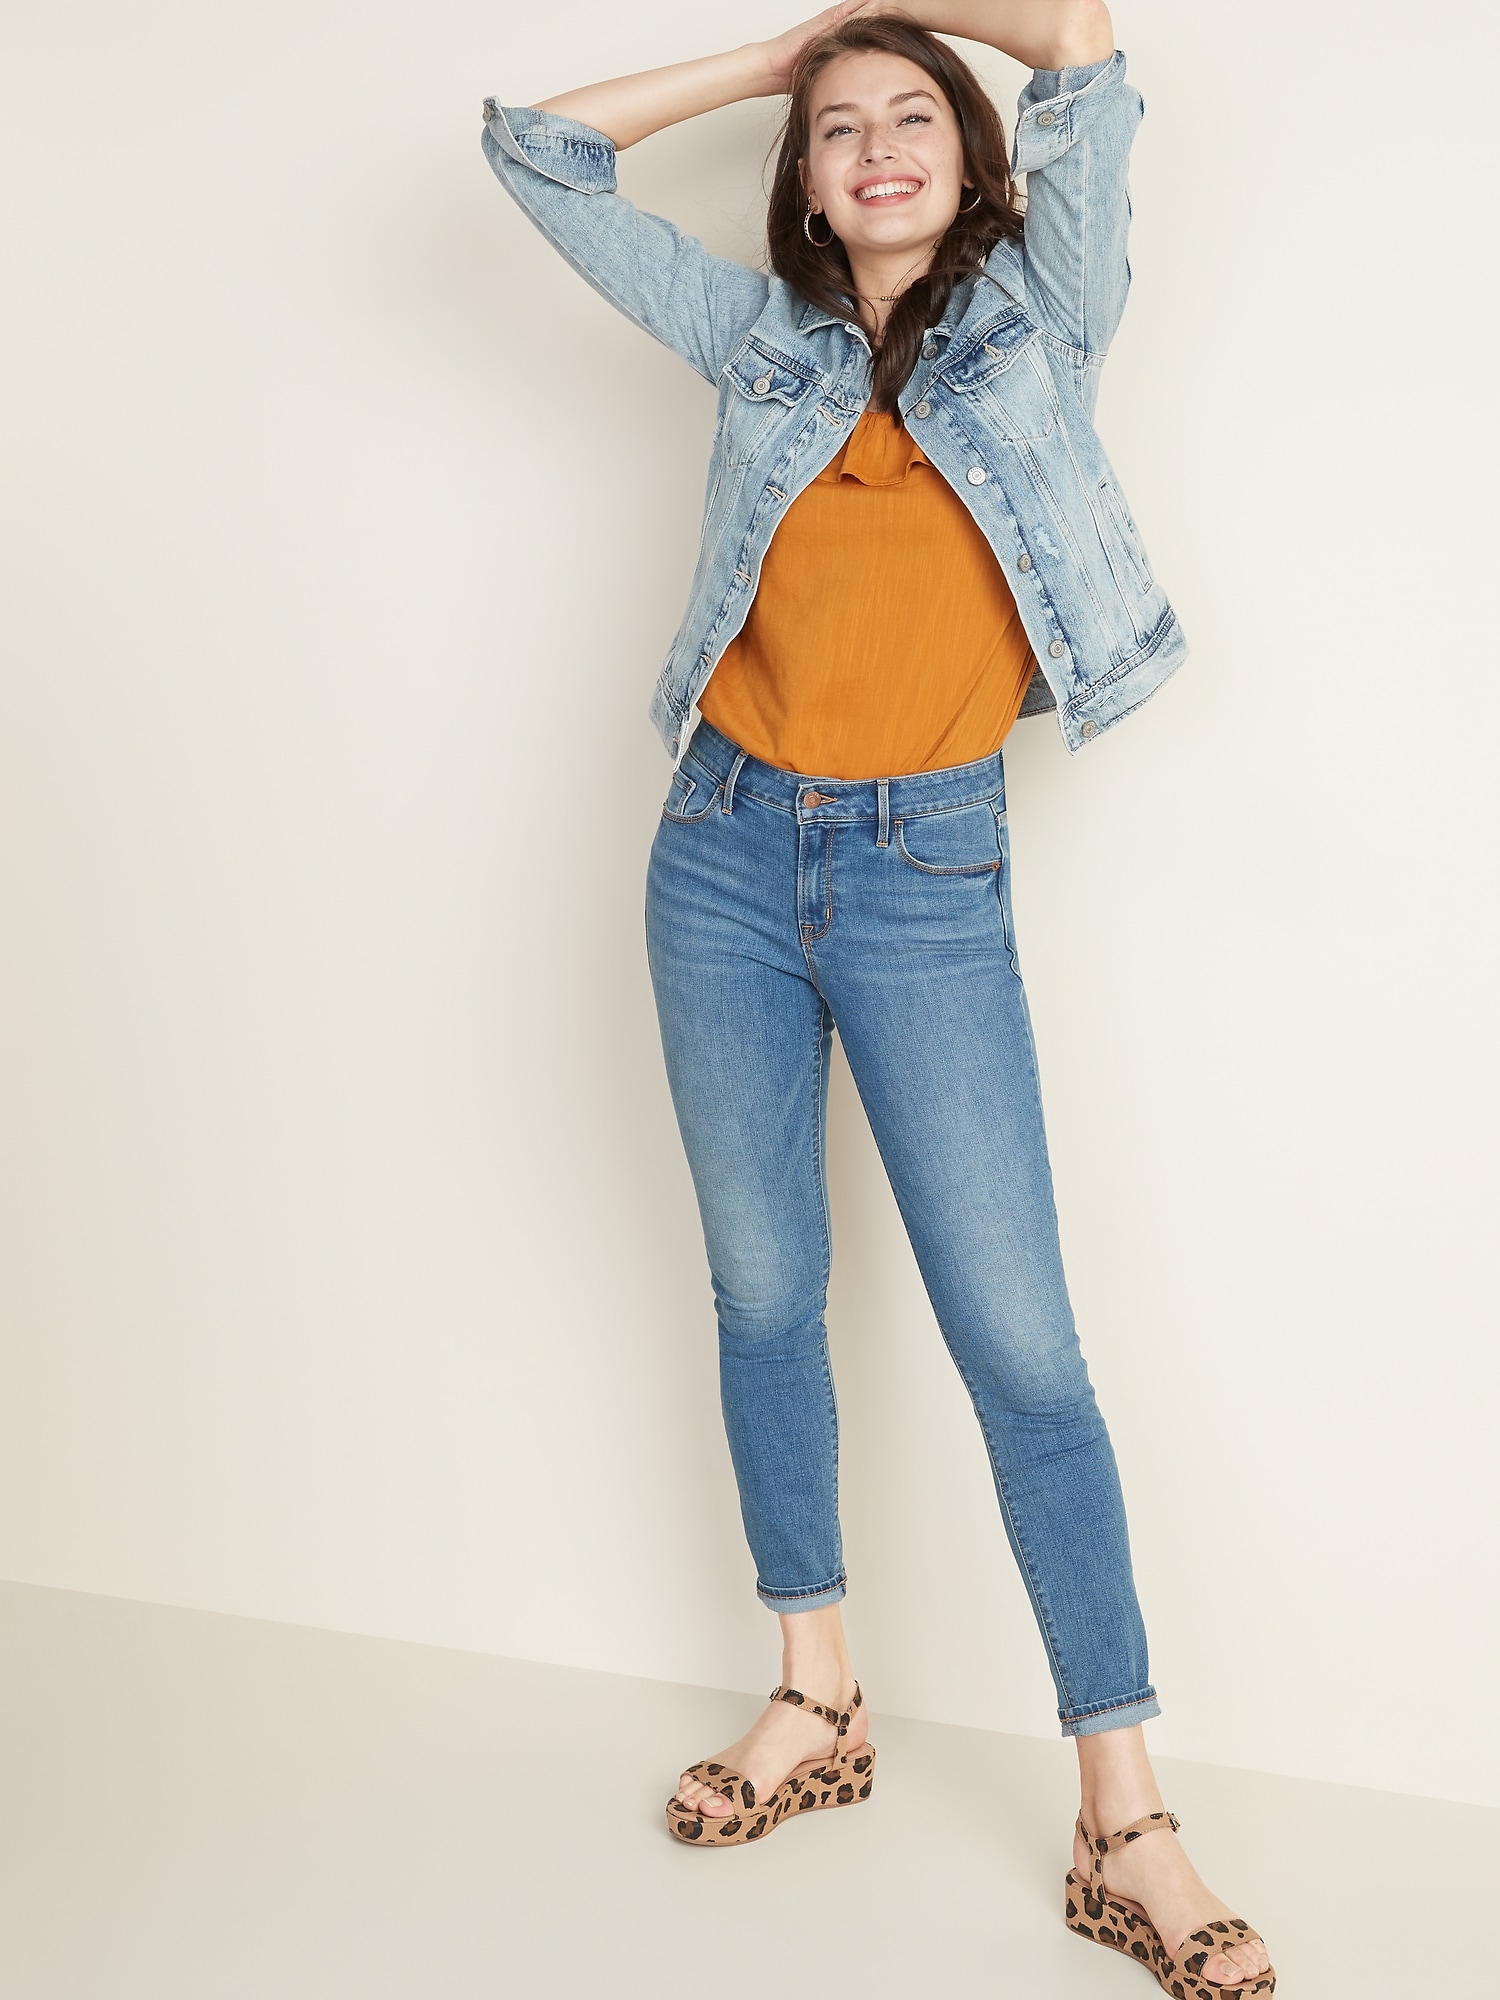 pop icon skinny jeans old navy